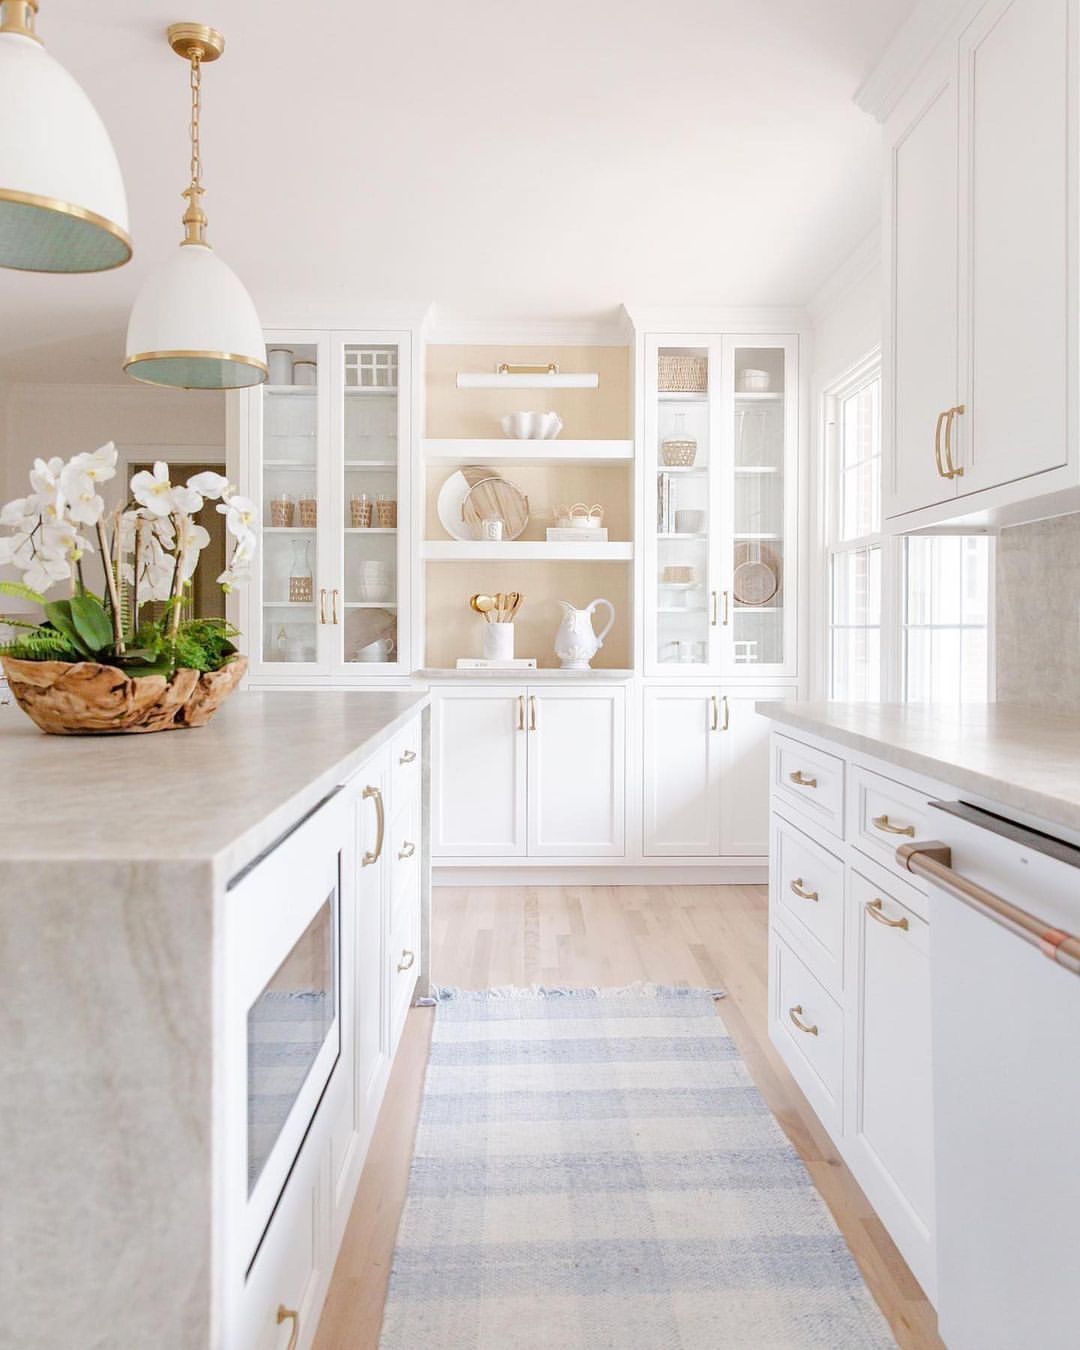  Bright and Airy: White Shaker Charm with Sleek Drawer Pull